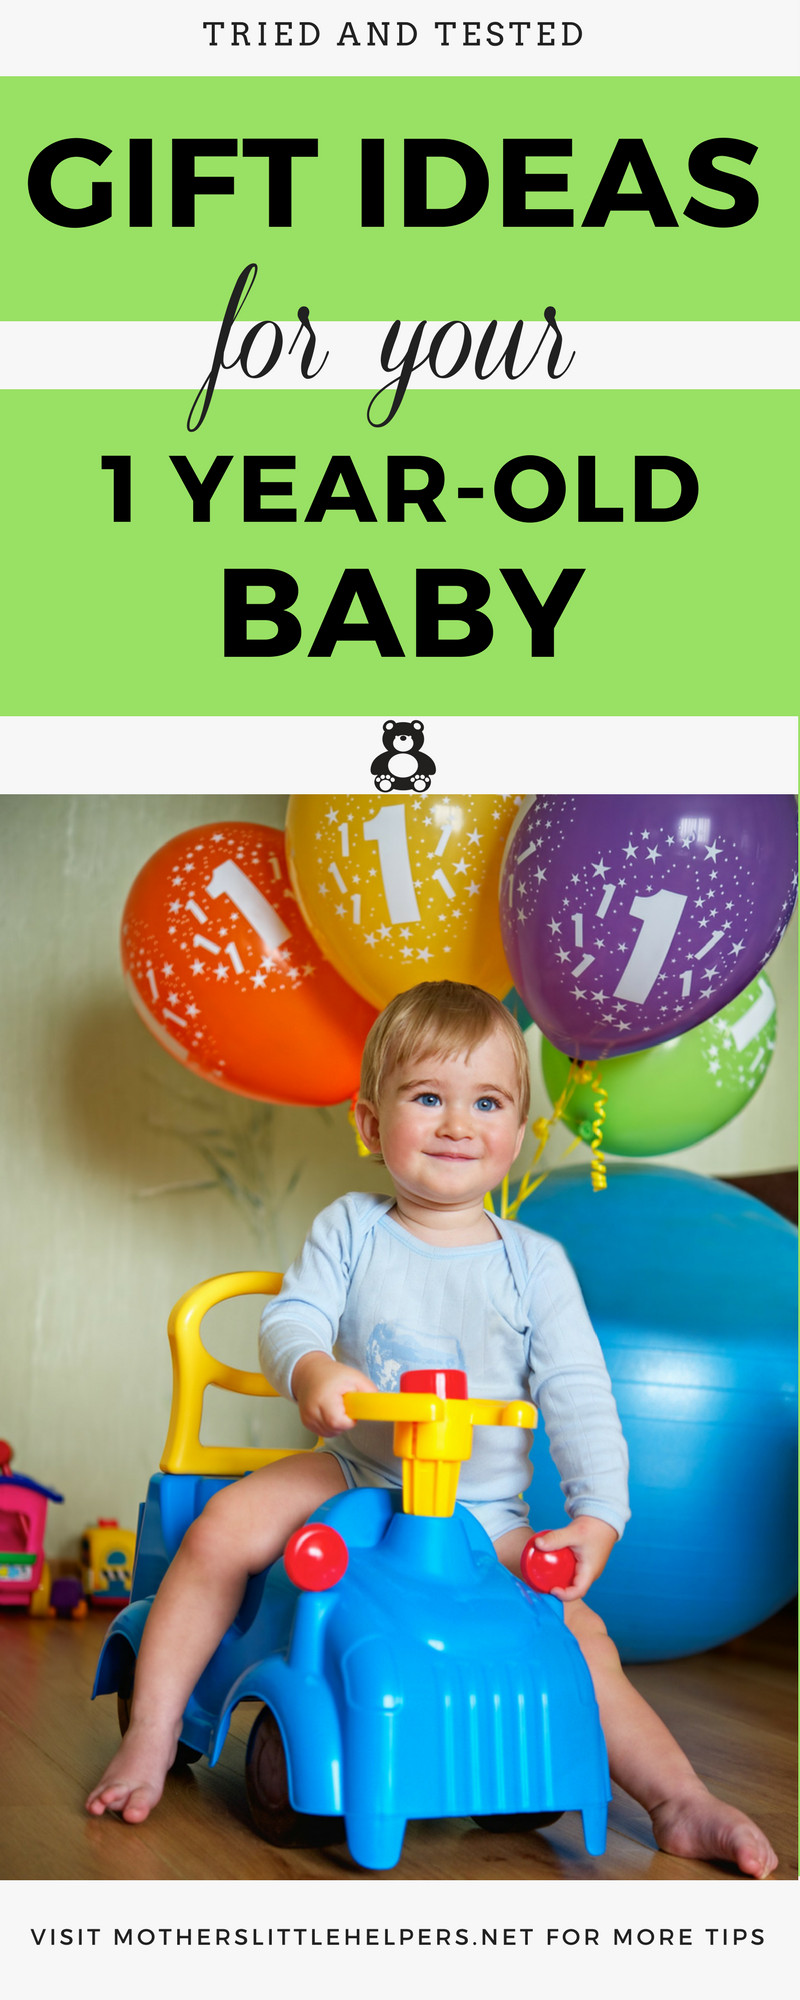 Birthday Gift For One Year Baby Boy
 Best Gift for e Year Old Baby Gift Guide 2019